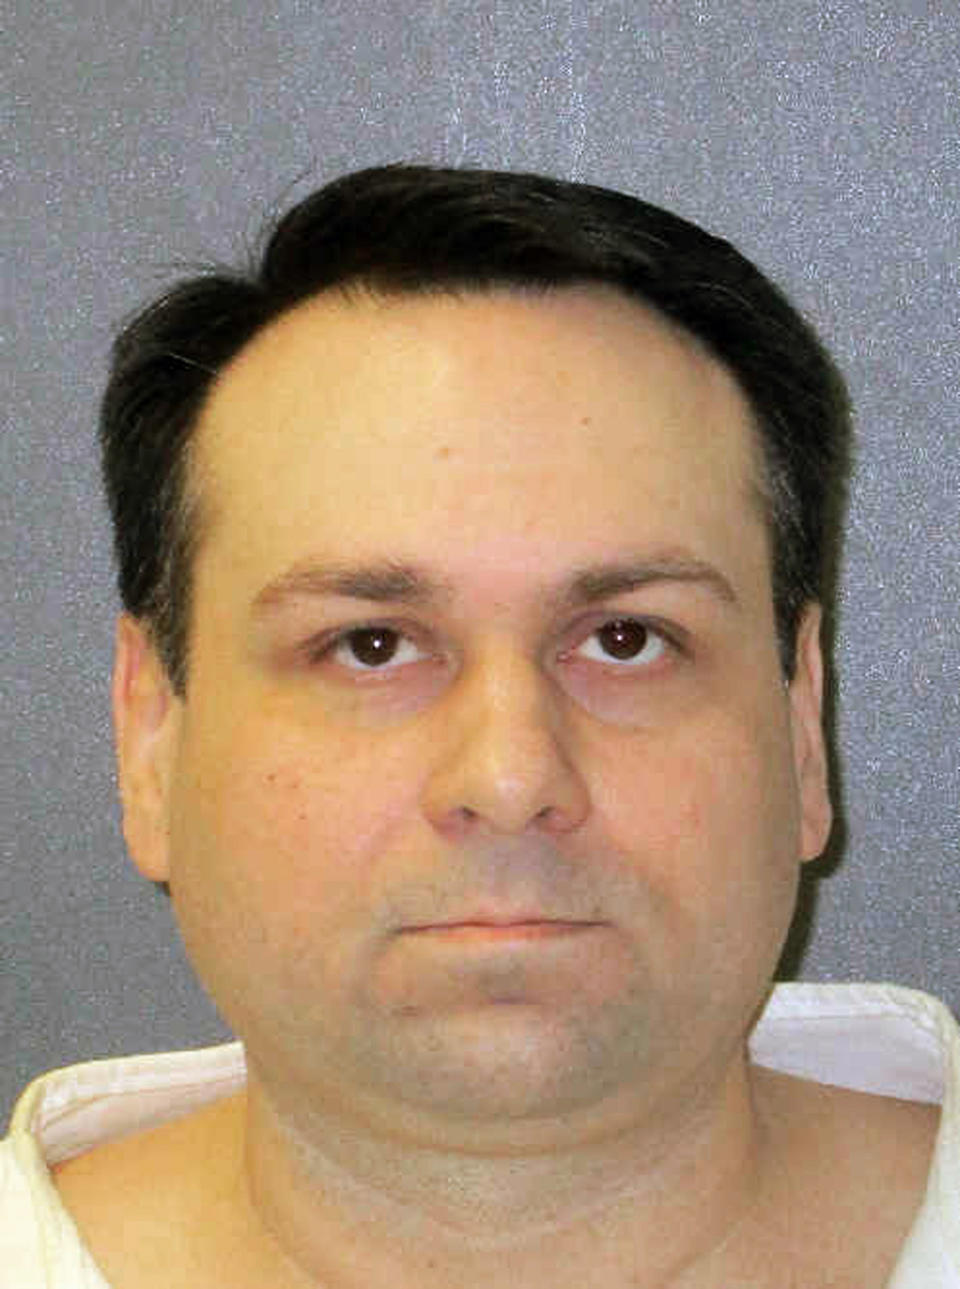 John William King was executed over the death of James Byrd Jr. Source: Texas Department of Criminal Justice via AP